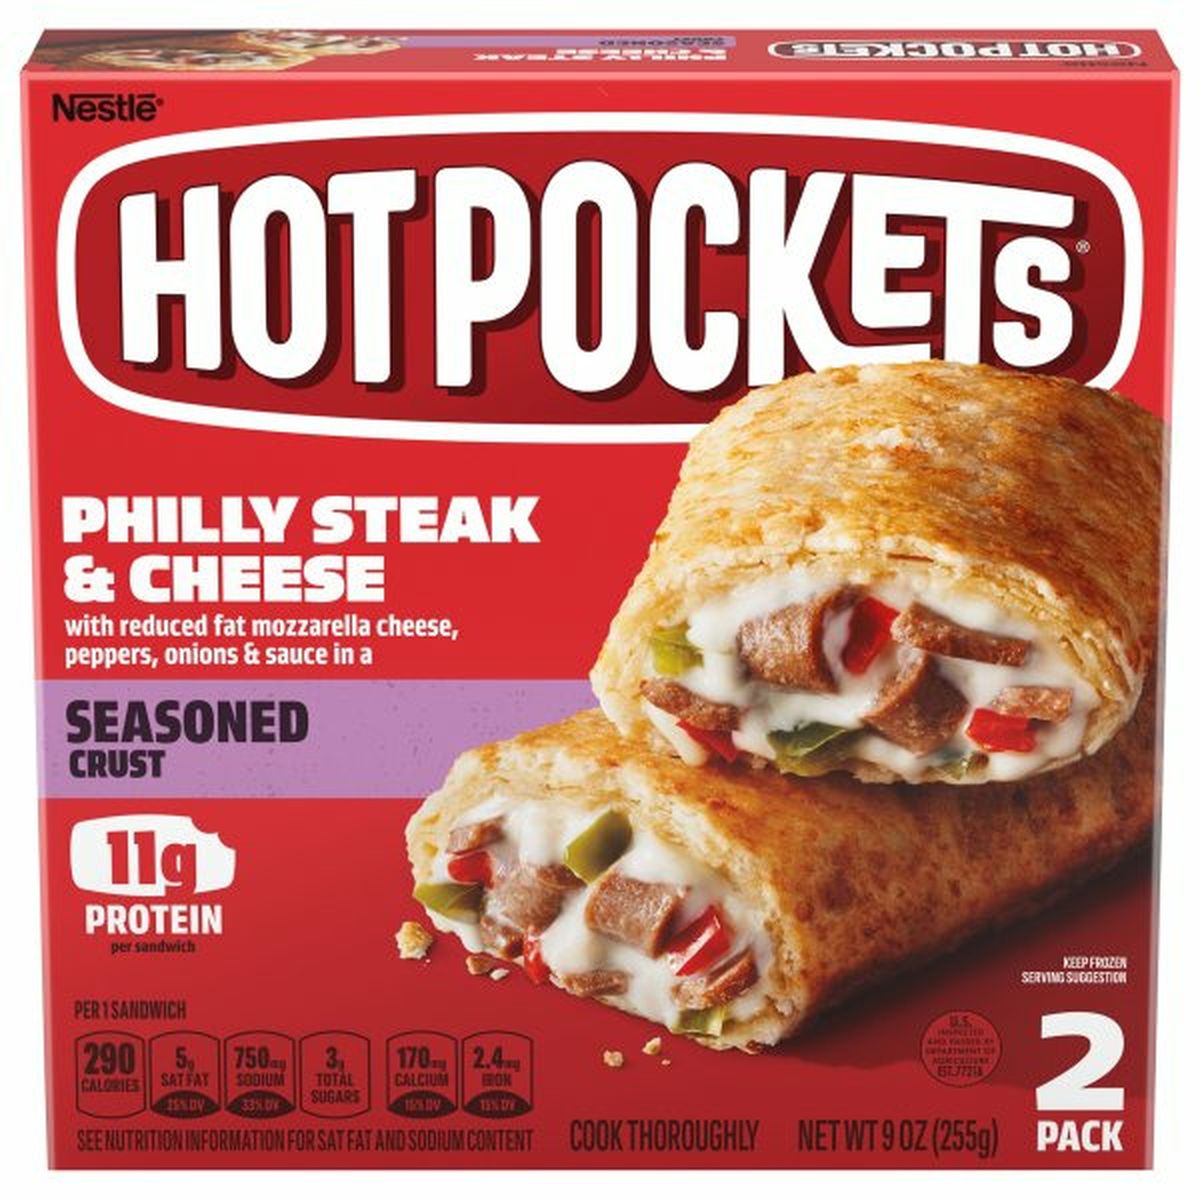 Calories in Hot Pockets Sandwiches, Philly Steak & Cheese, Seasoned Crust, 2 Pack